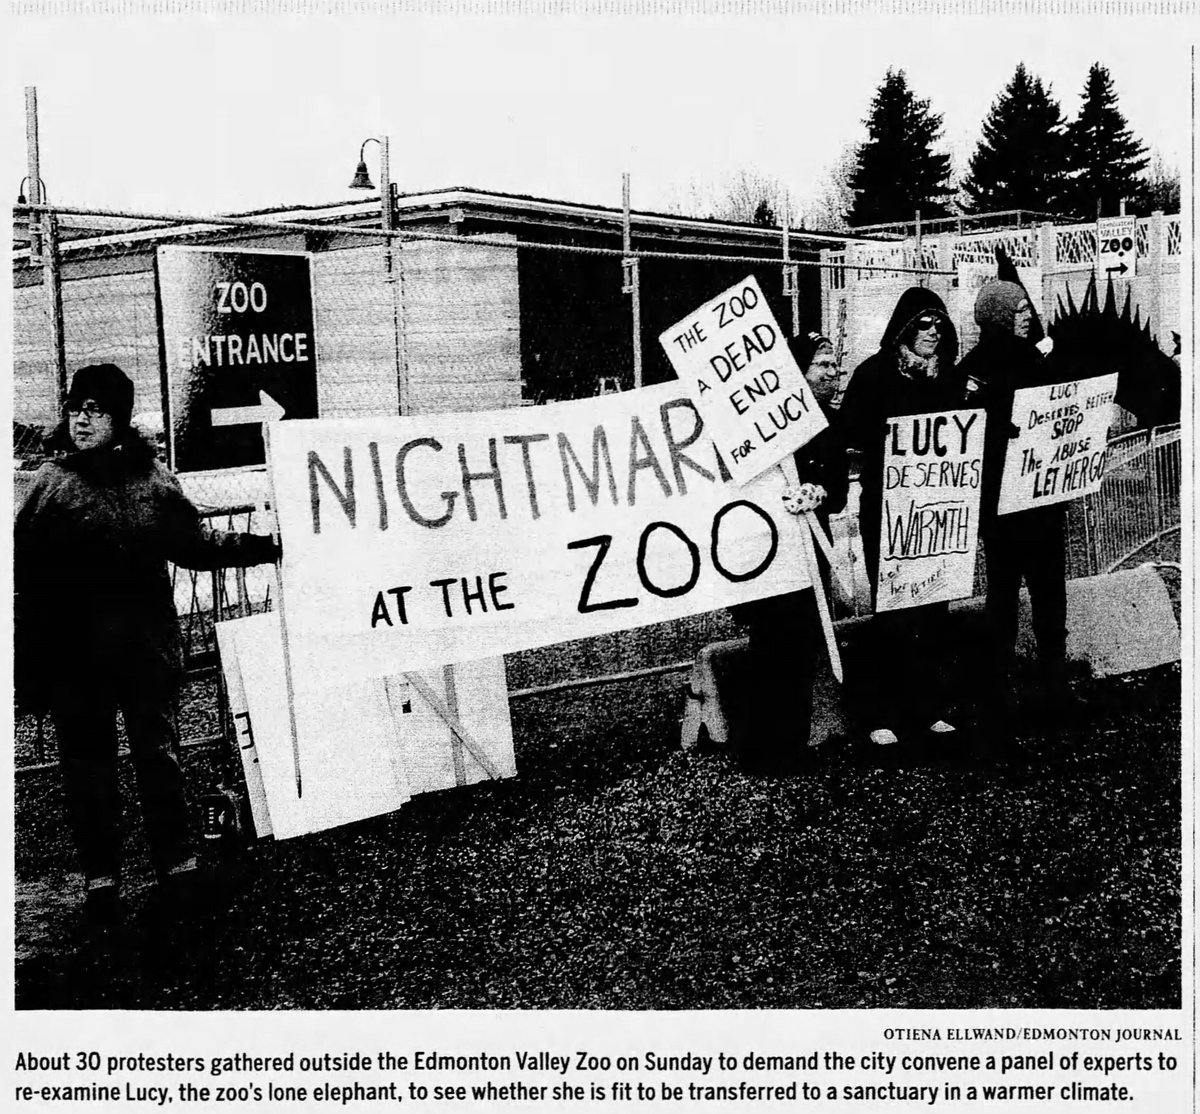 Animal advocates continue to fight for Lucy's freedom. As long as she keeps showing us her remarkable will to live in the face of neglect & diseases inflicted on her by the #EdmontonValleyZoo we will not give up until we #FreeLucy @AmarjeetSohiYEG